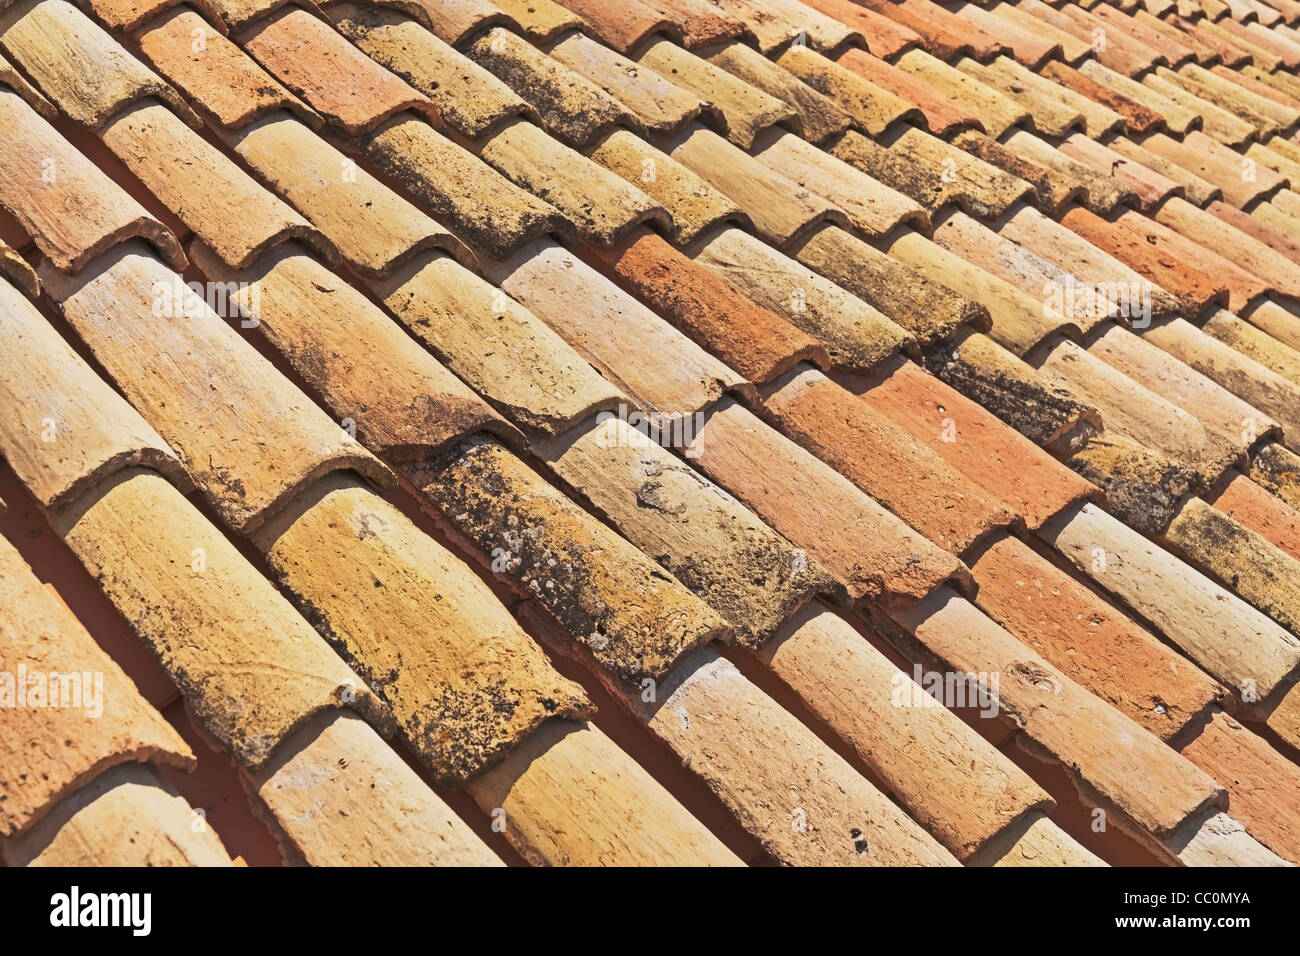 Detail photo of a tiled roof in the old town of Dubrovnik, Dalmatia, Croatia, Europe Stock Photo